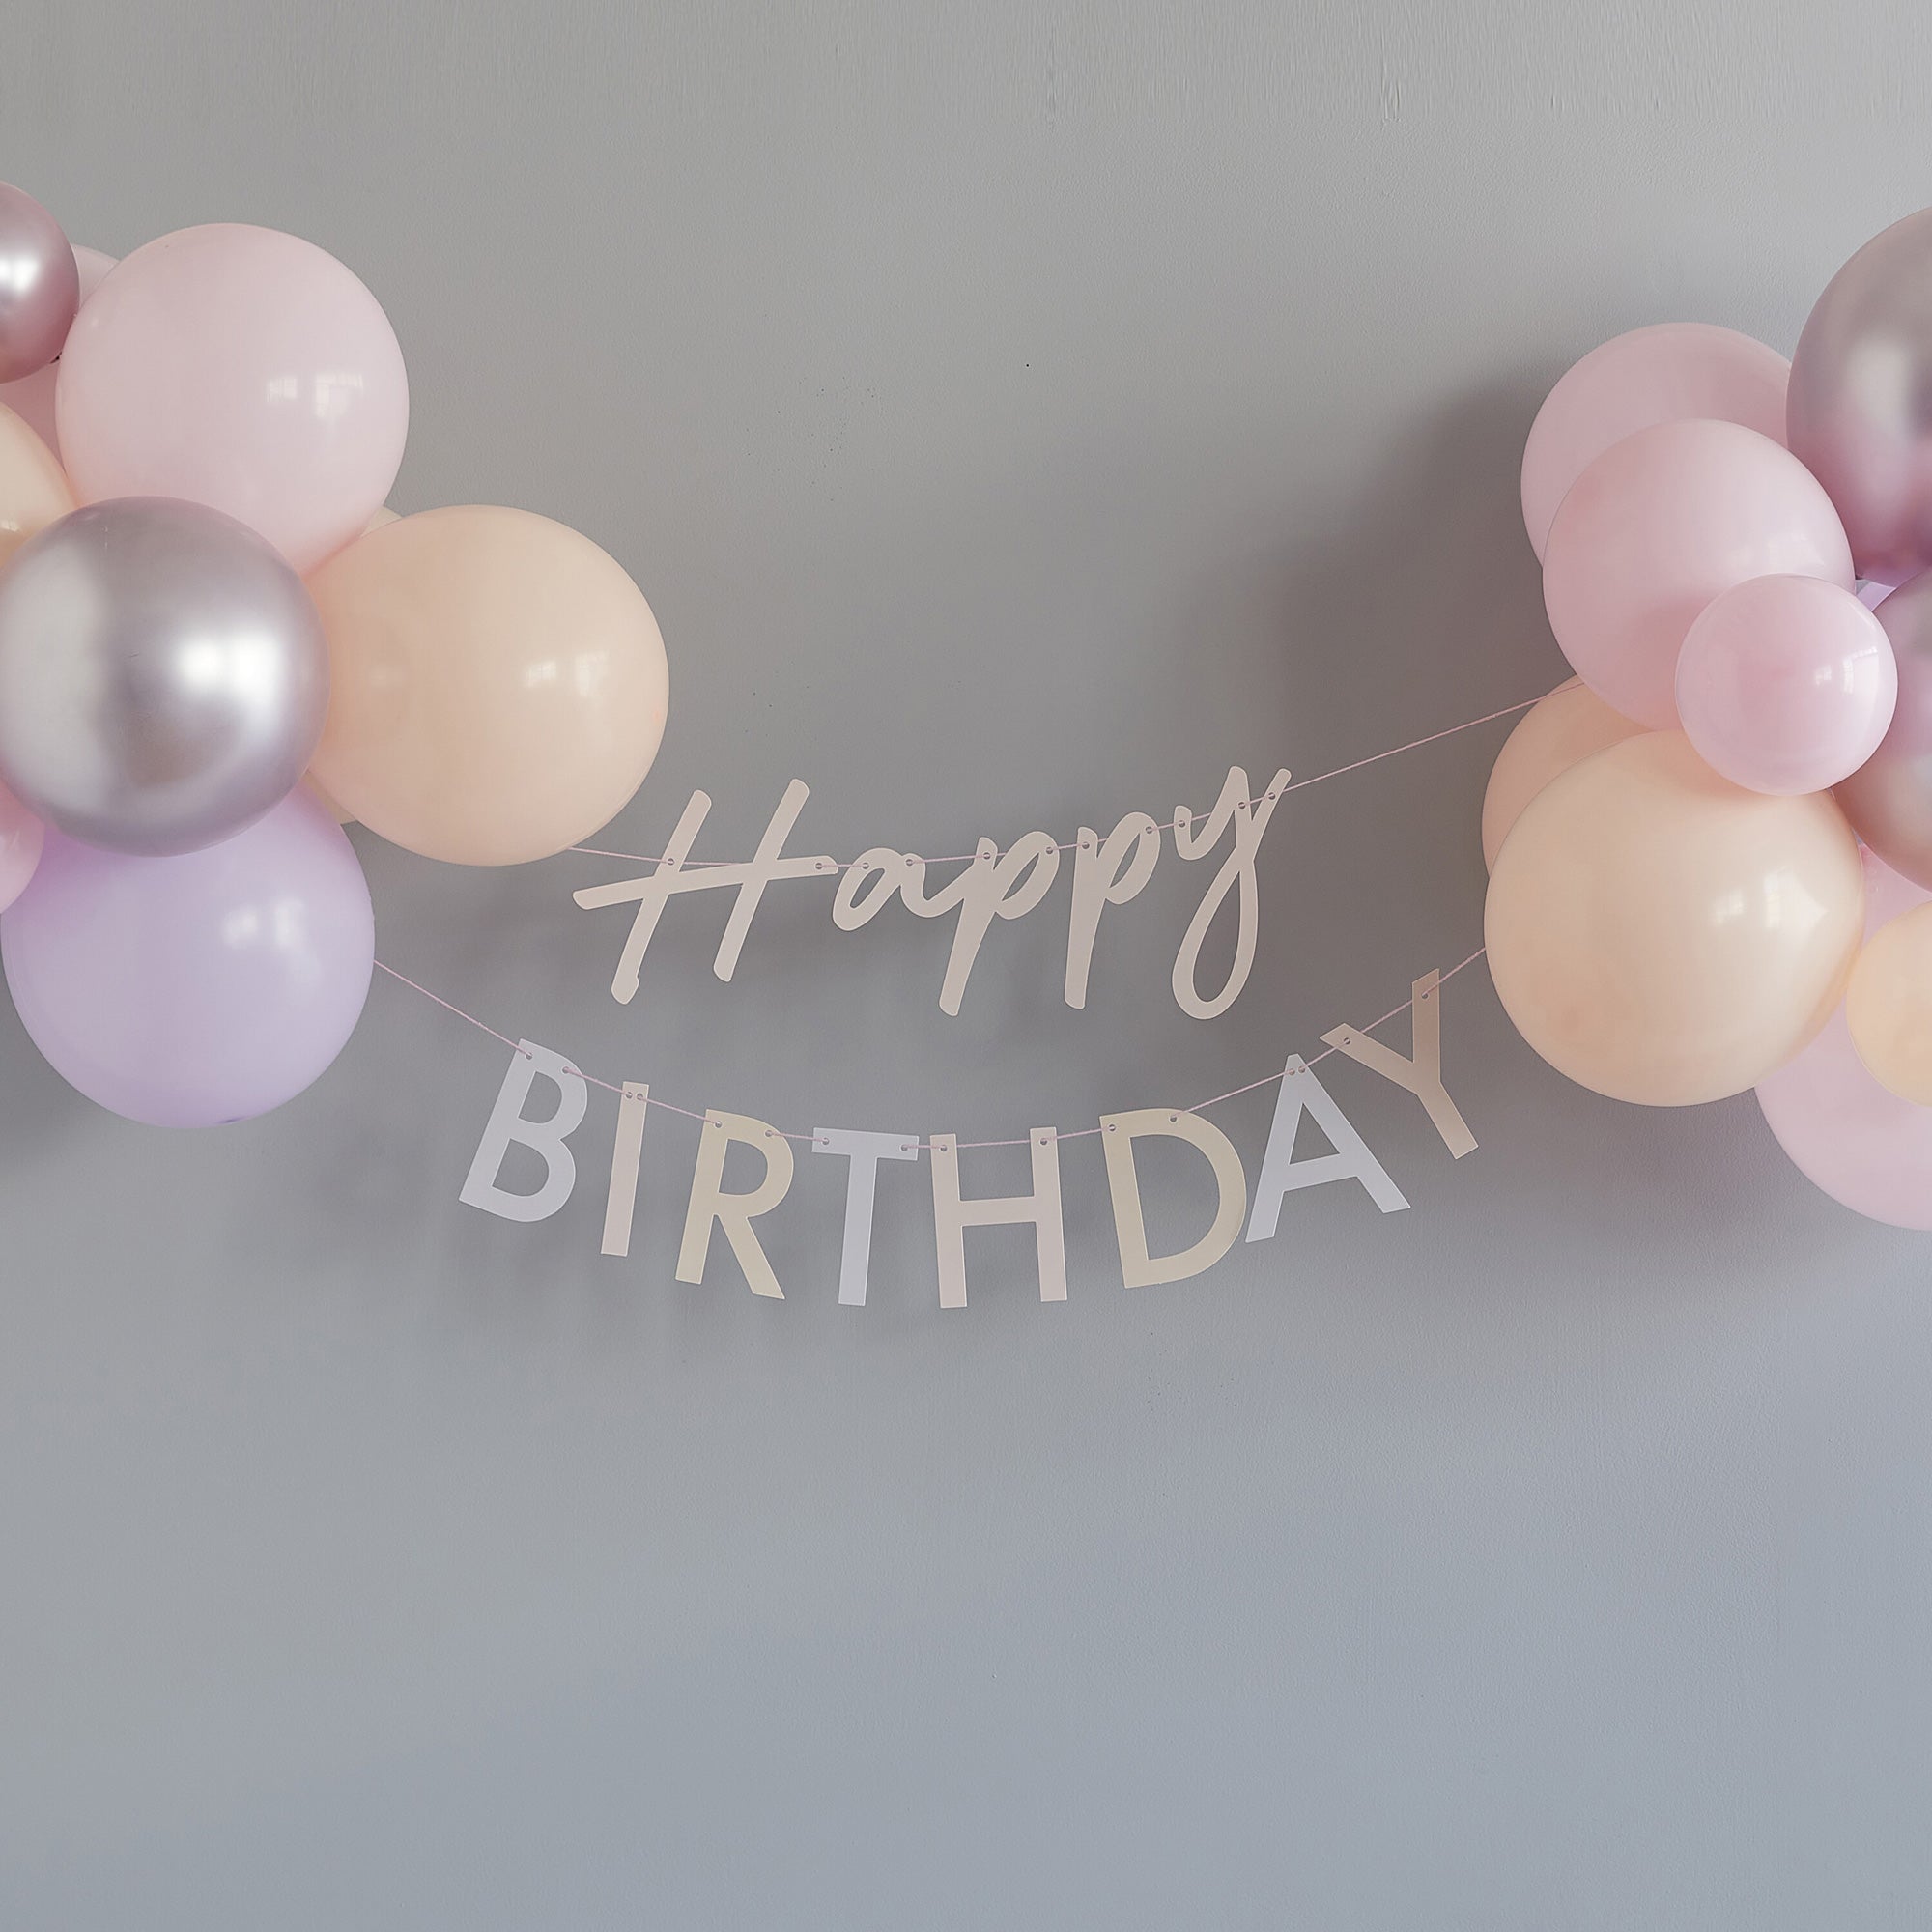 Mix It Up Pastel Pink Happy Birthday Bunting with Balloons 24pcs